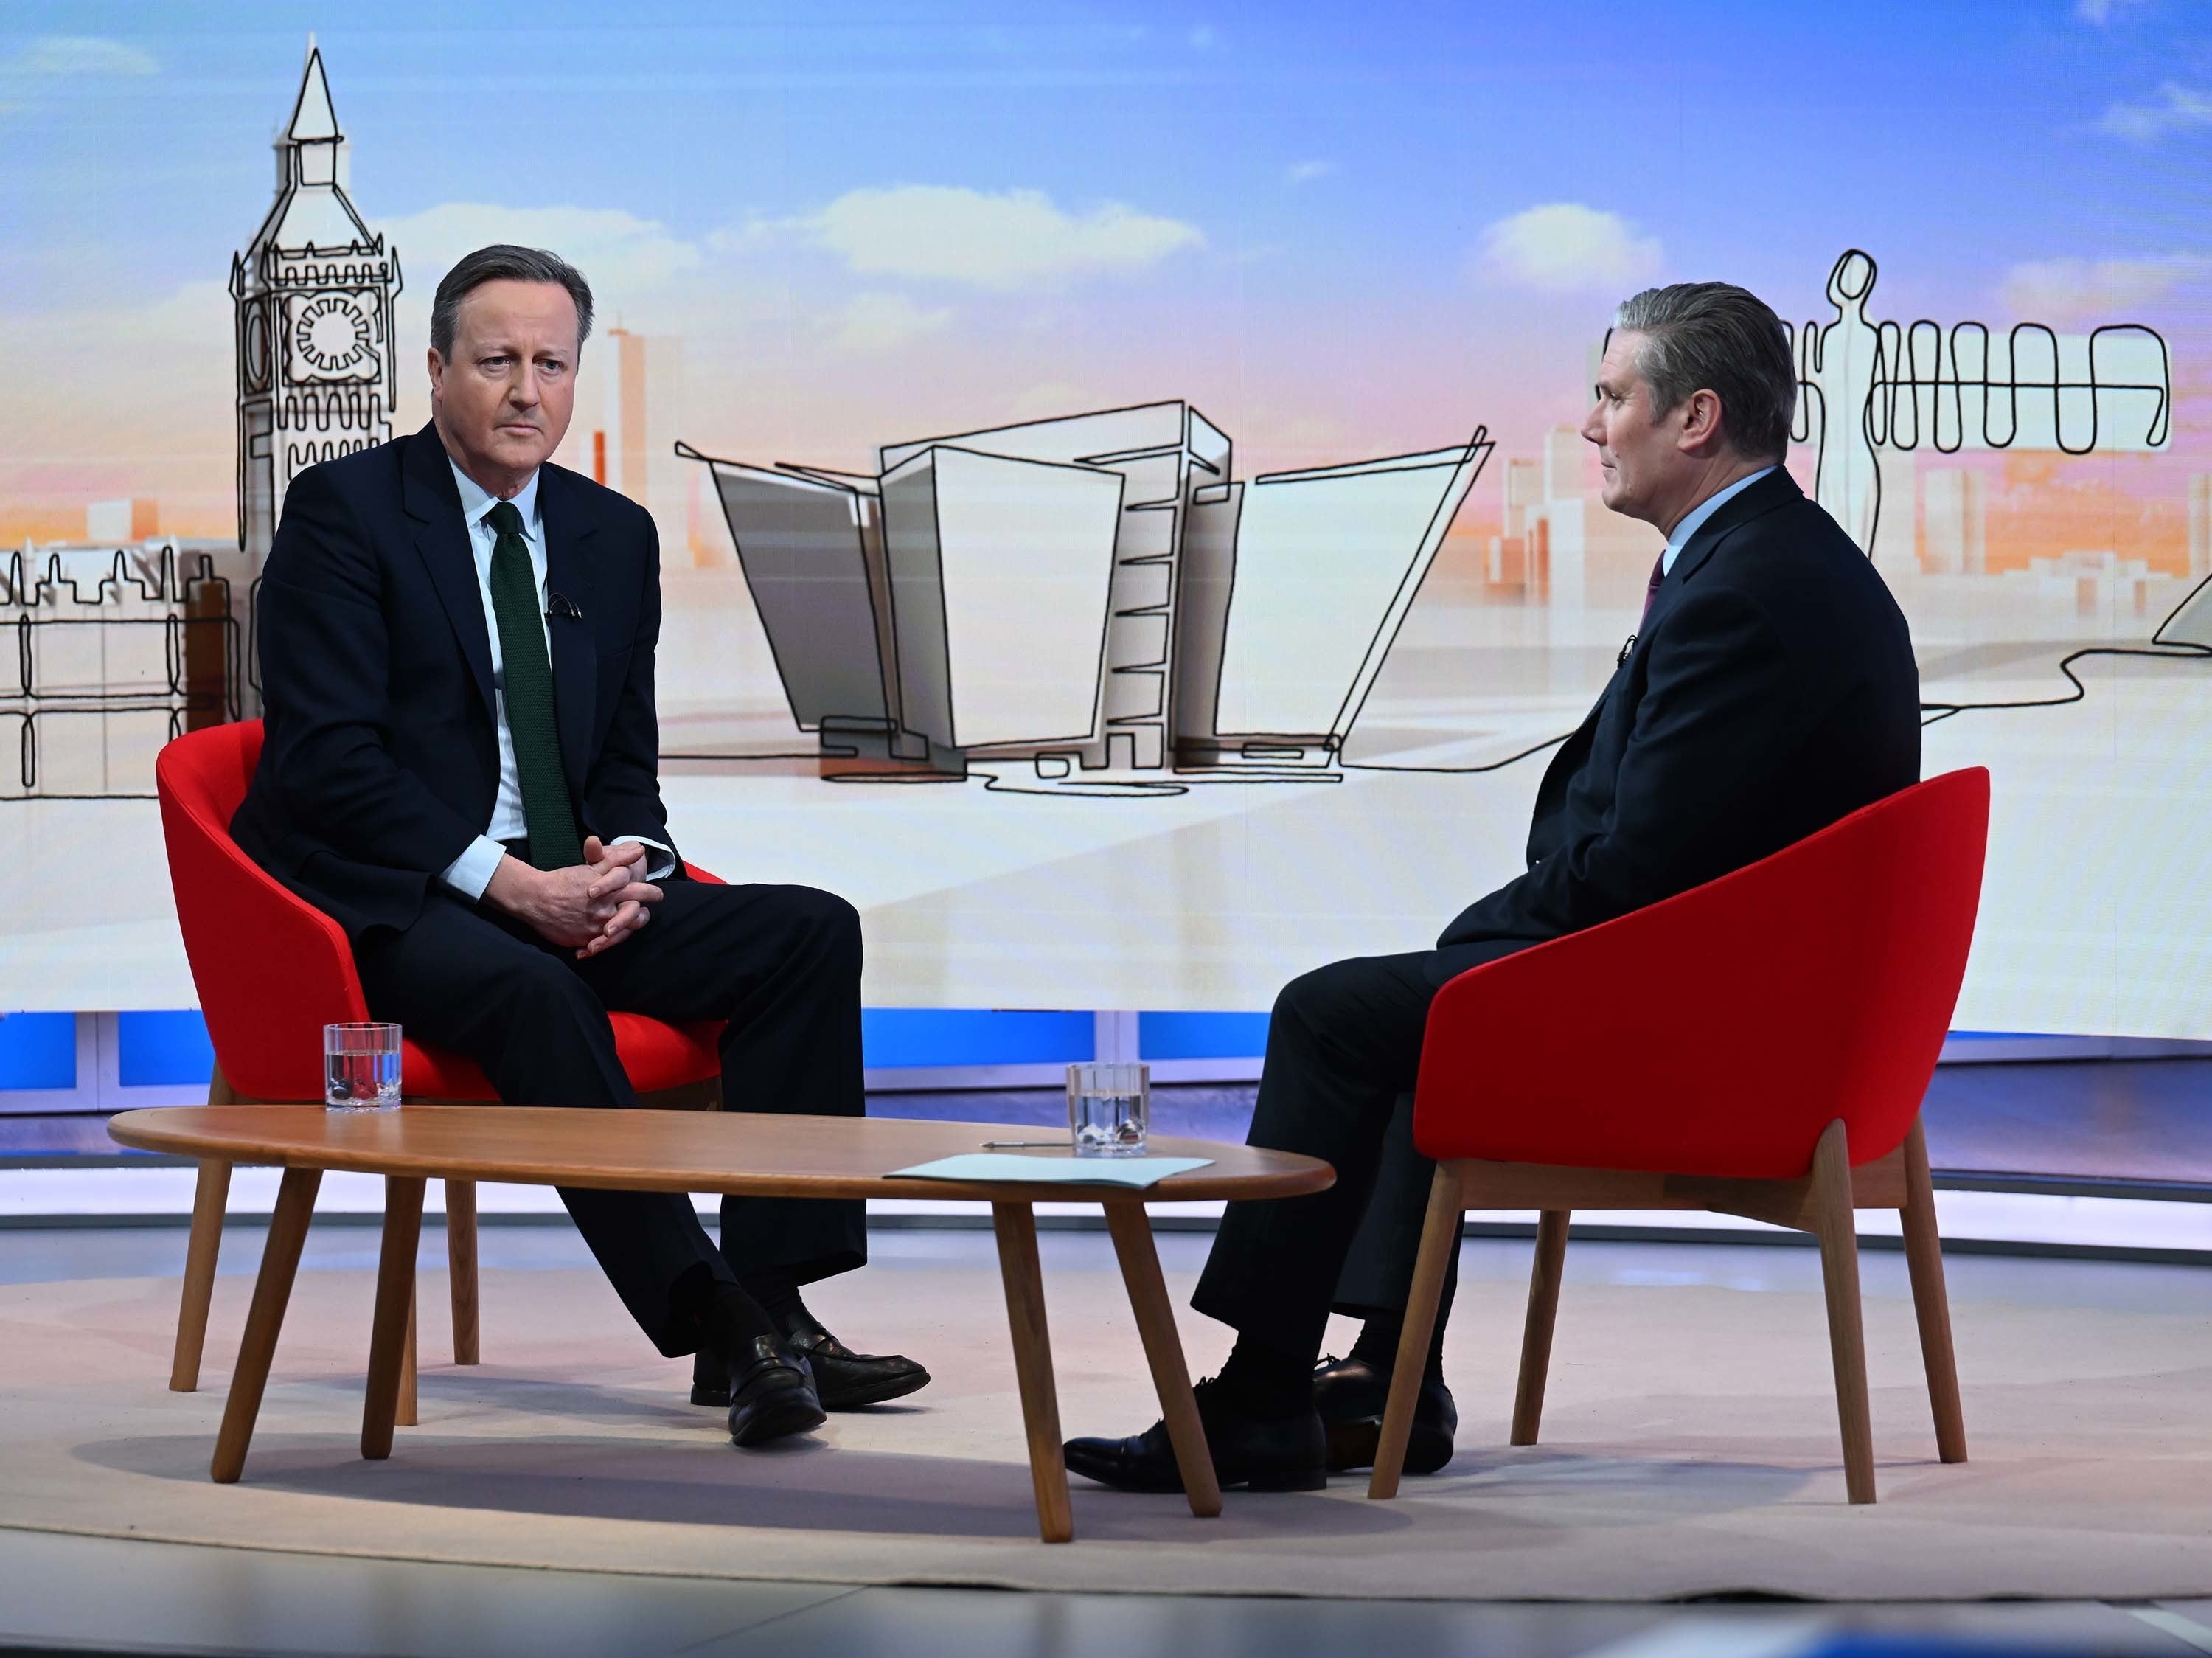 Sir Keir Starmer and Lord Cameron on the BBC’s ‘Sunday with Laura Kuenssberg’